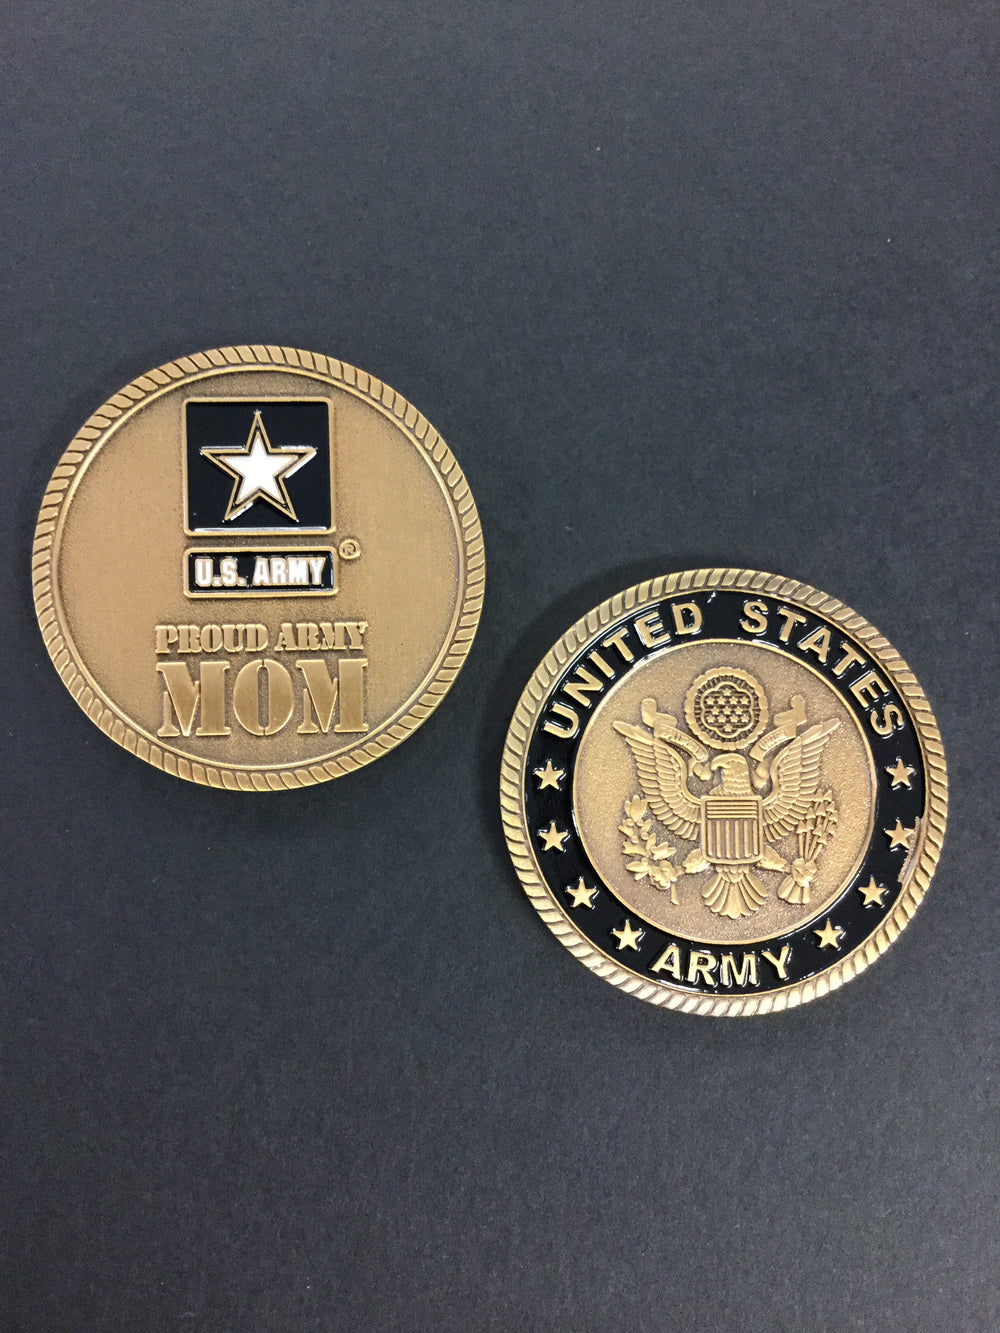 Proud Army Mom Coin